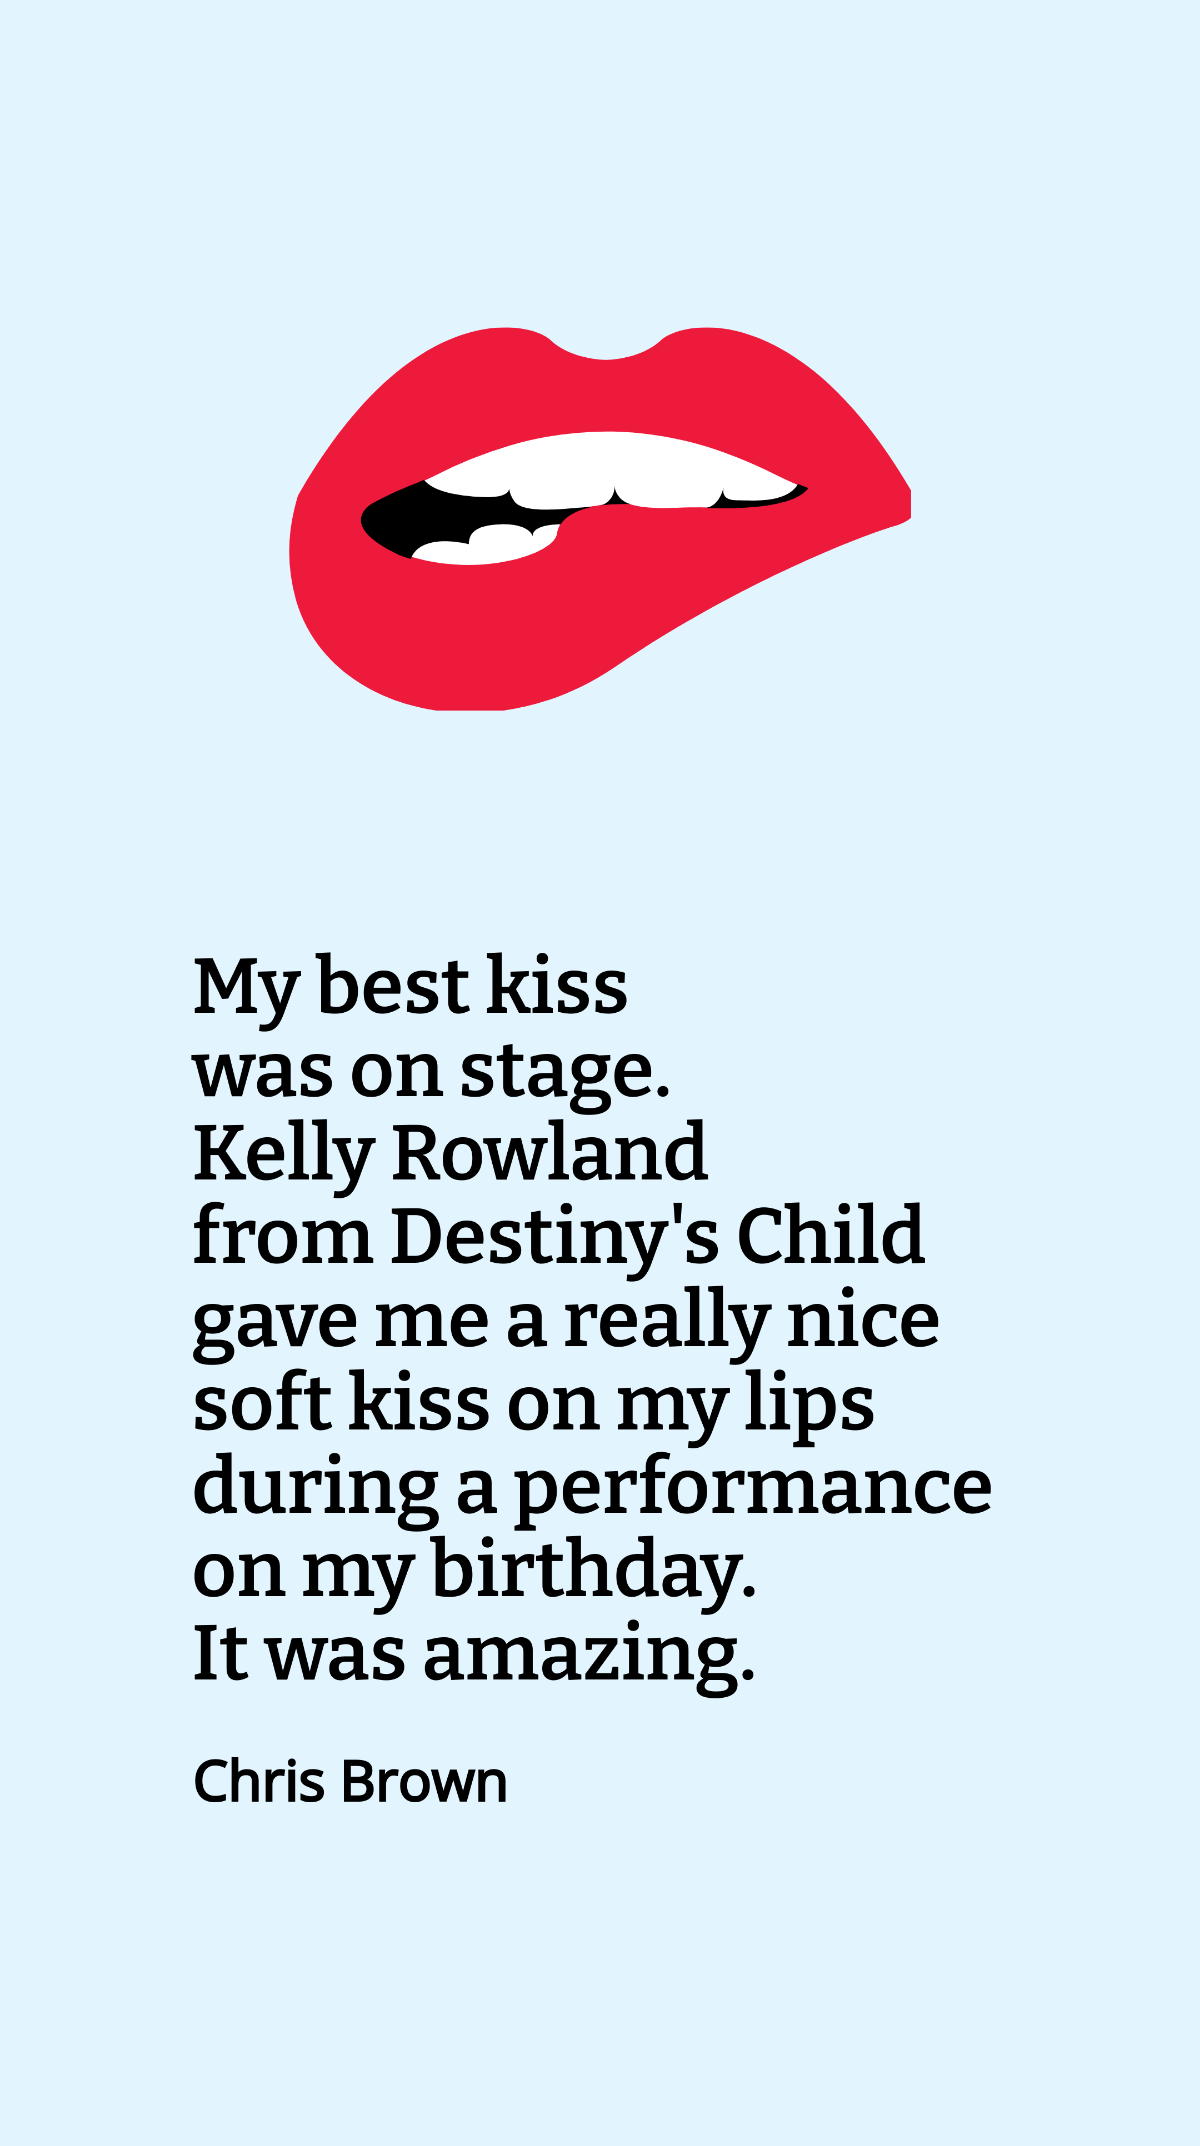 Chris Brown - My best kiss was on stage. Kelly Rowland from Destiny's Child gave me a really nice soft kiss on my lips during a performance on my birthday. It was amazing. Template